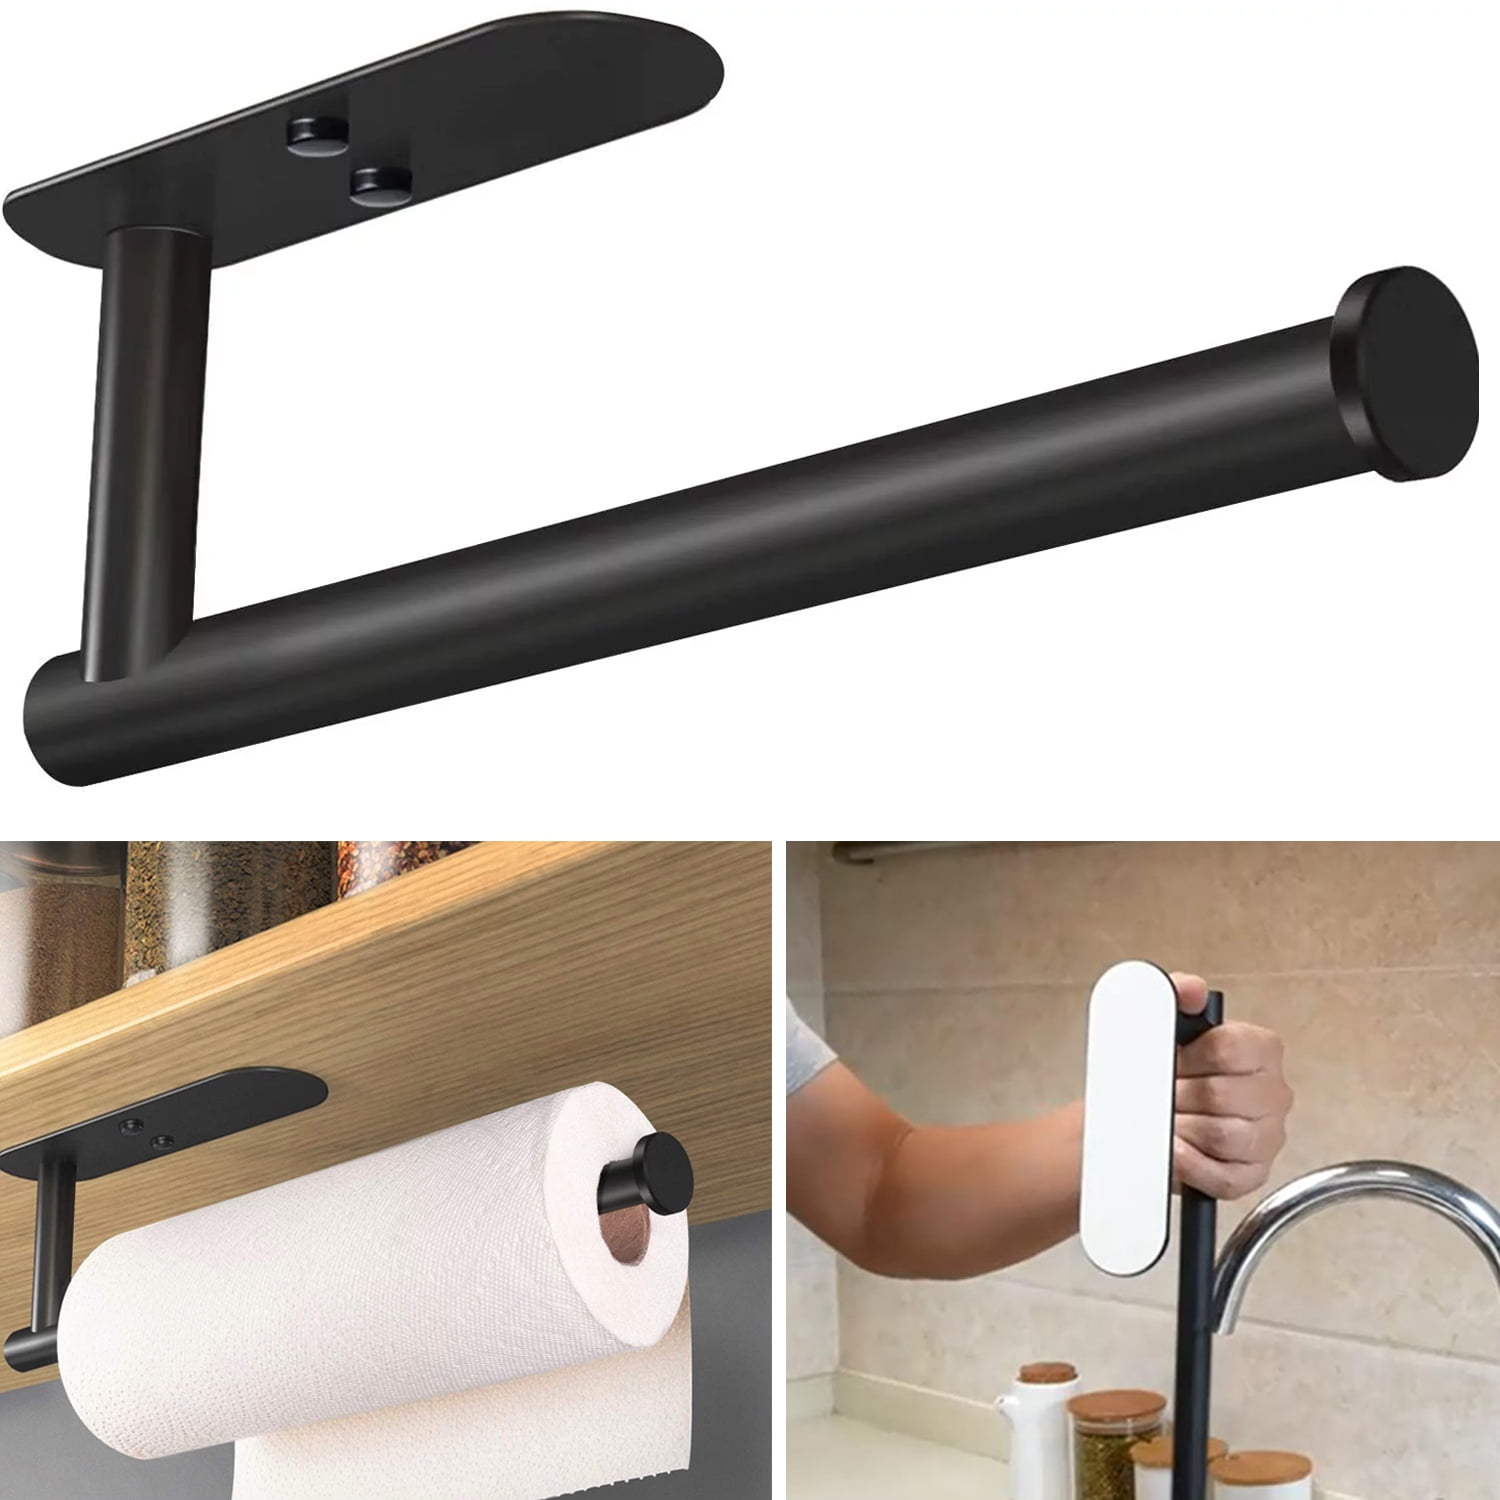  TONLEA Under Cabinet Paper Towel Holder - Wall Mount Kitchen  Paper Towel Rack with 3M Self-Adhesive or Drilling Option - Perfect for  Pantry, Sink, Bathroom - Black